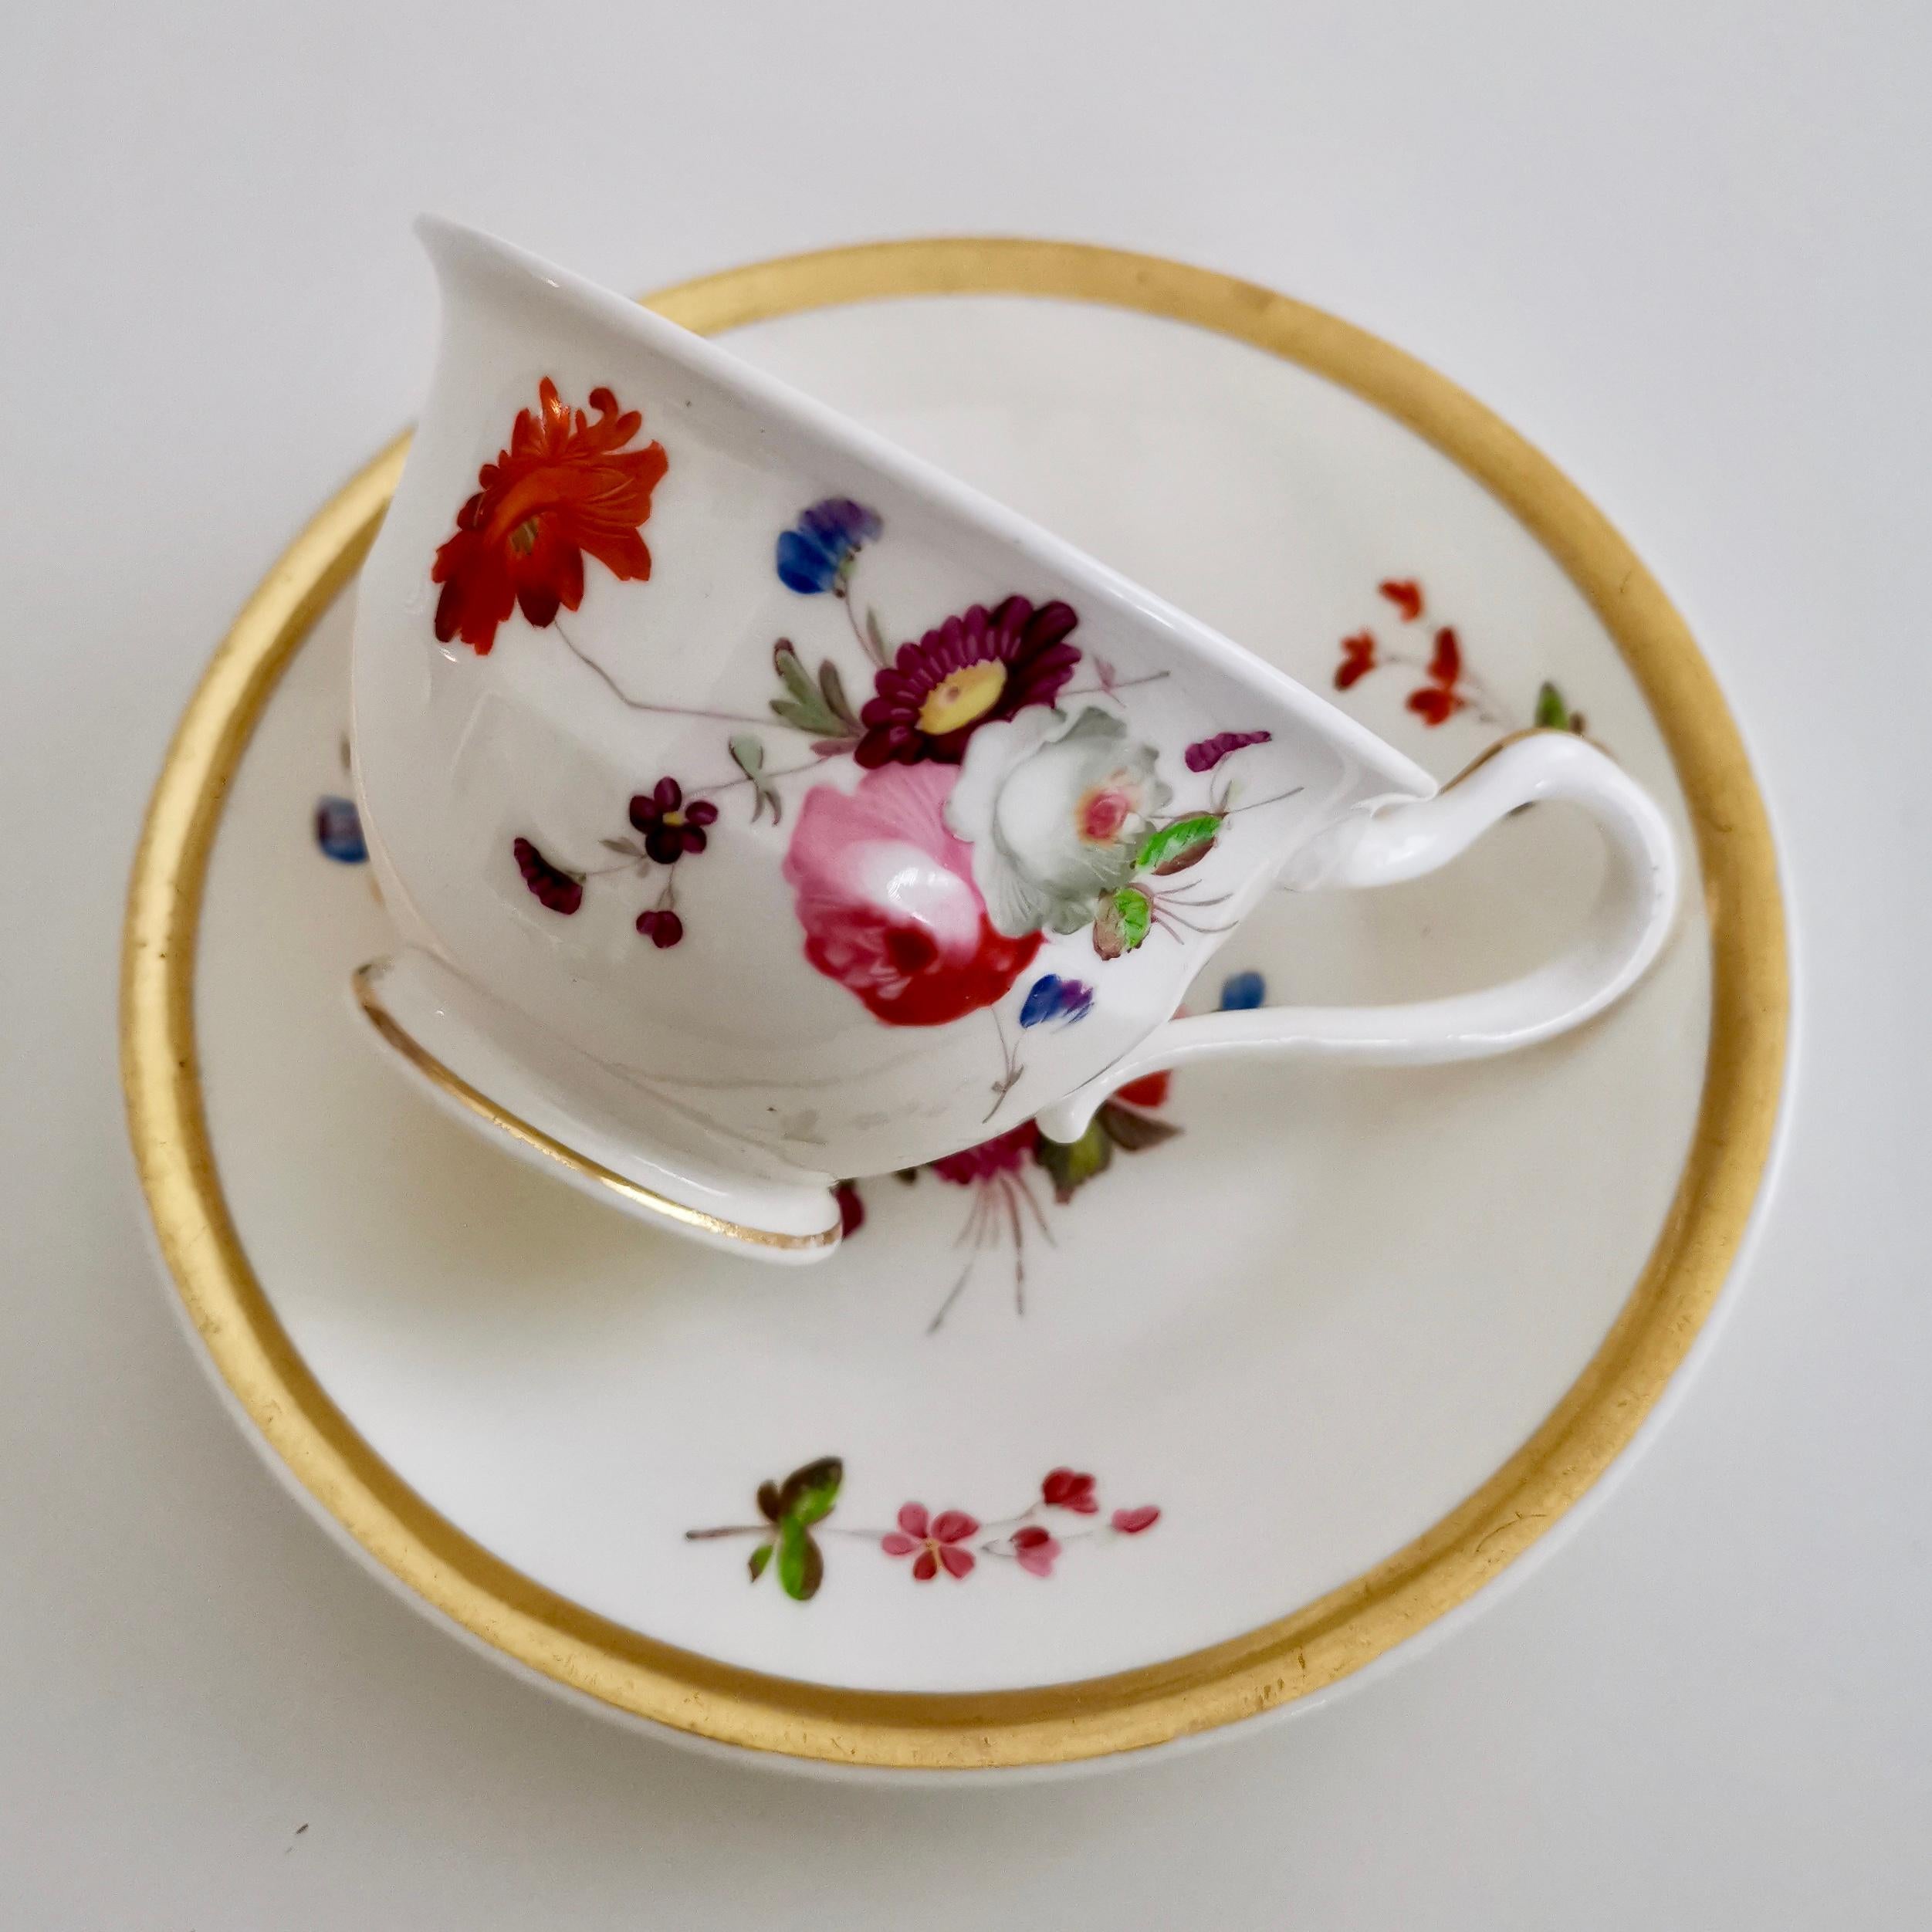 This is a beautifully decorated coffee cup and saucer made by Samuel Alcock, circa 1820. The cup is decorated in a style that closely resembles that of the Welsh Swansea factory, which was very popular at the time.

Samuel Alcock was one of the